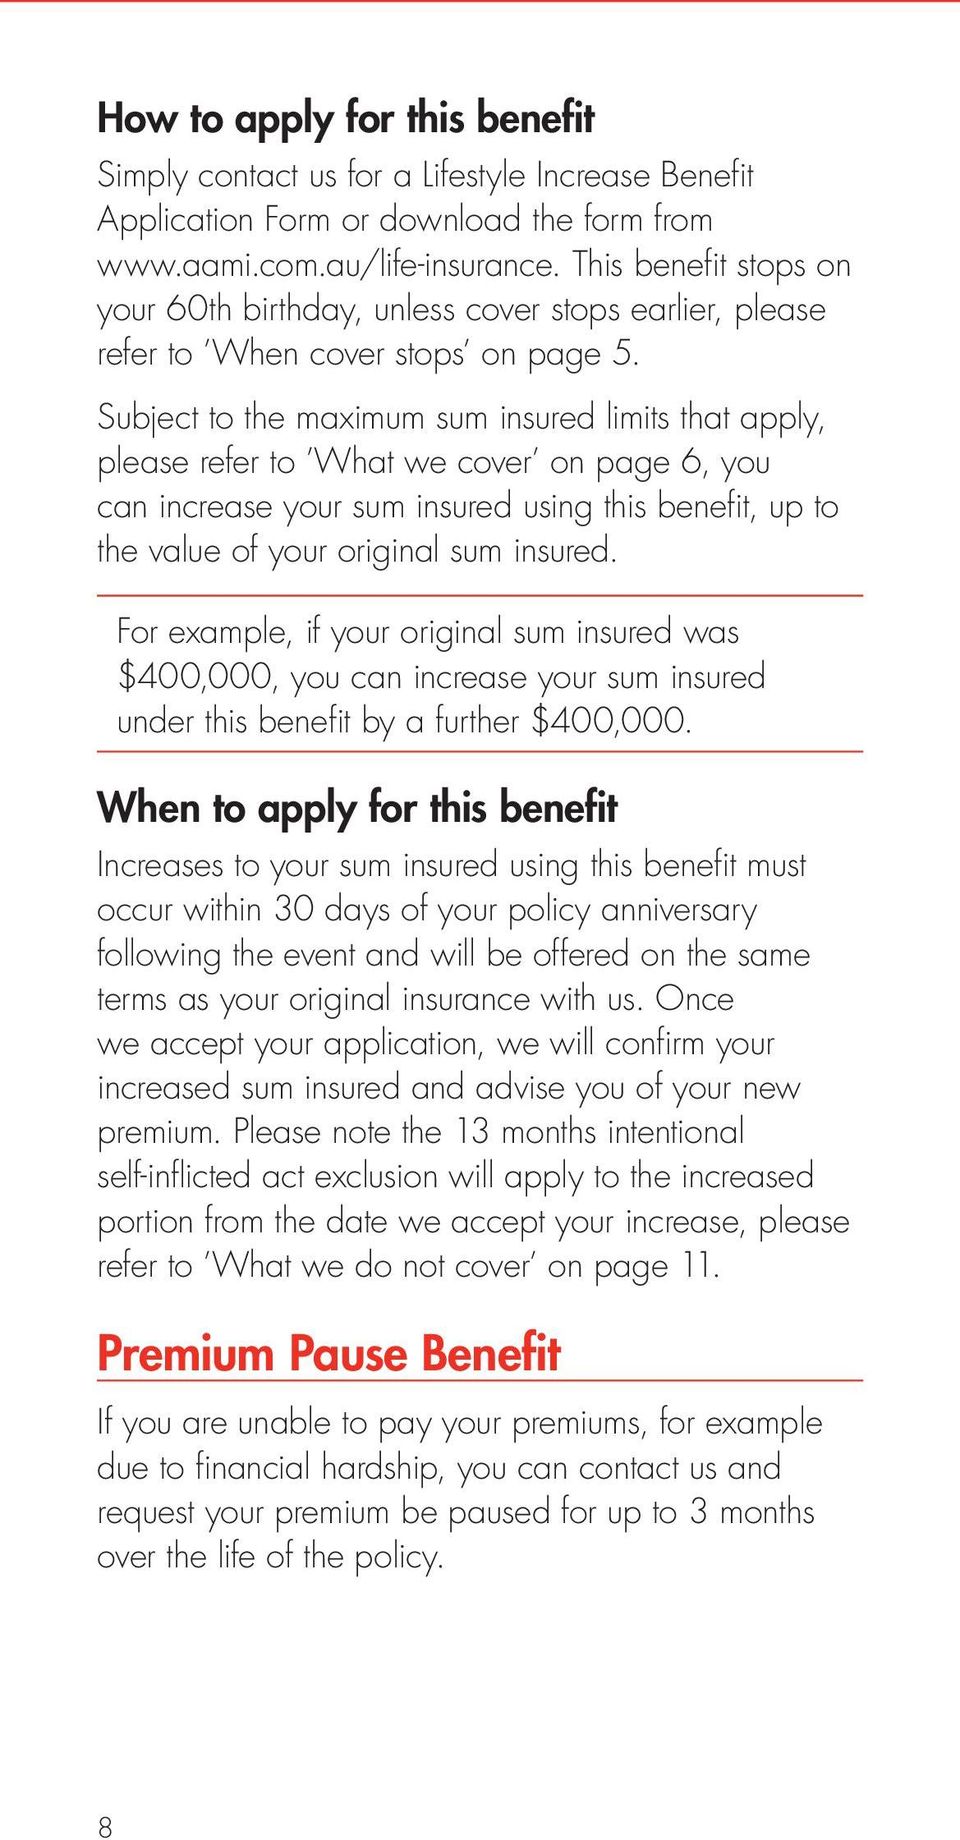 Subject to the maximum sum insured limits that apply, please refer to What we cover on page 6, you can increase your sum insured using this benefit, up to the value of your original sum insured.